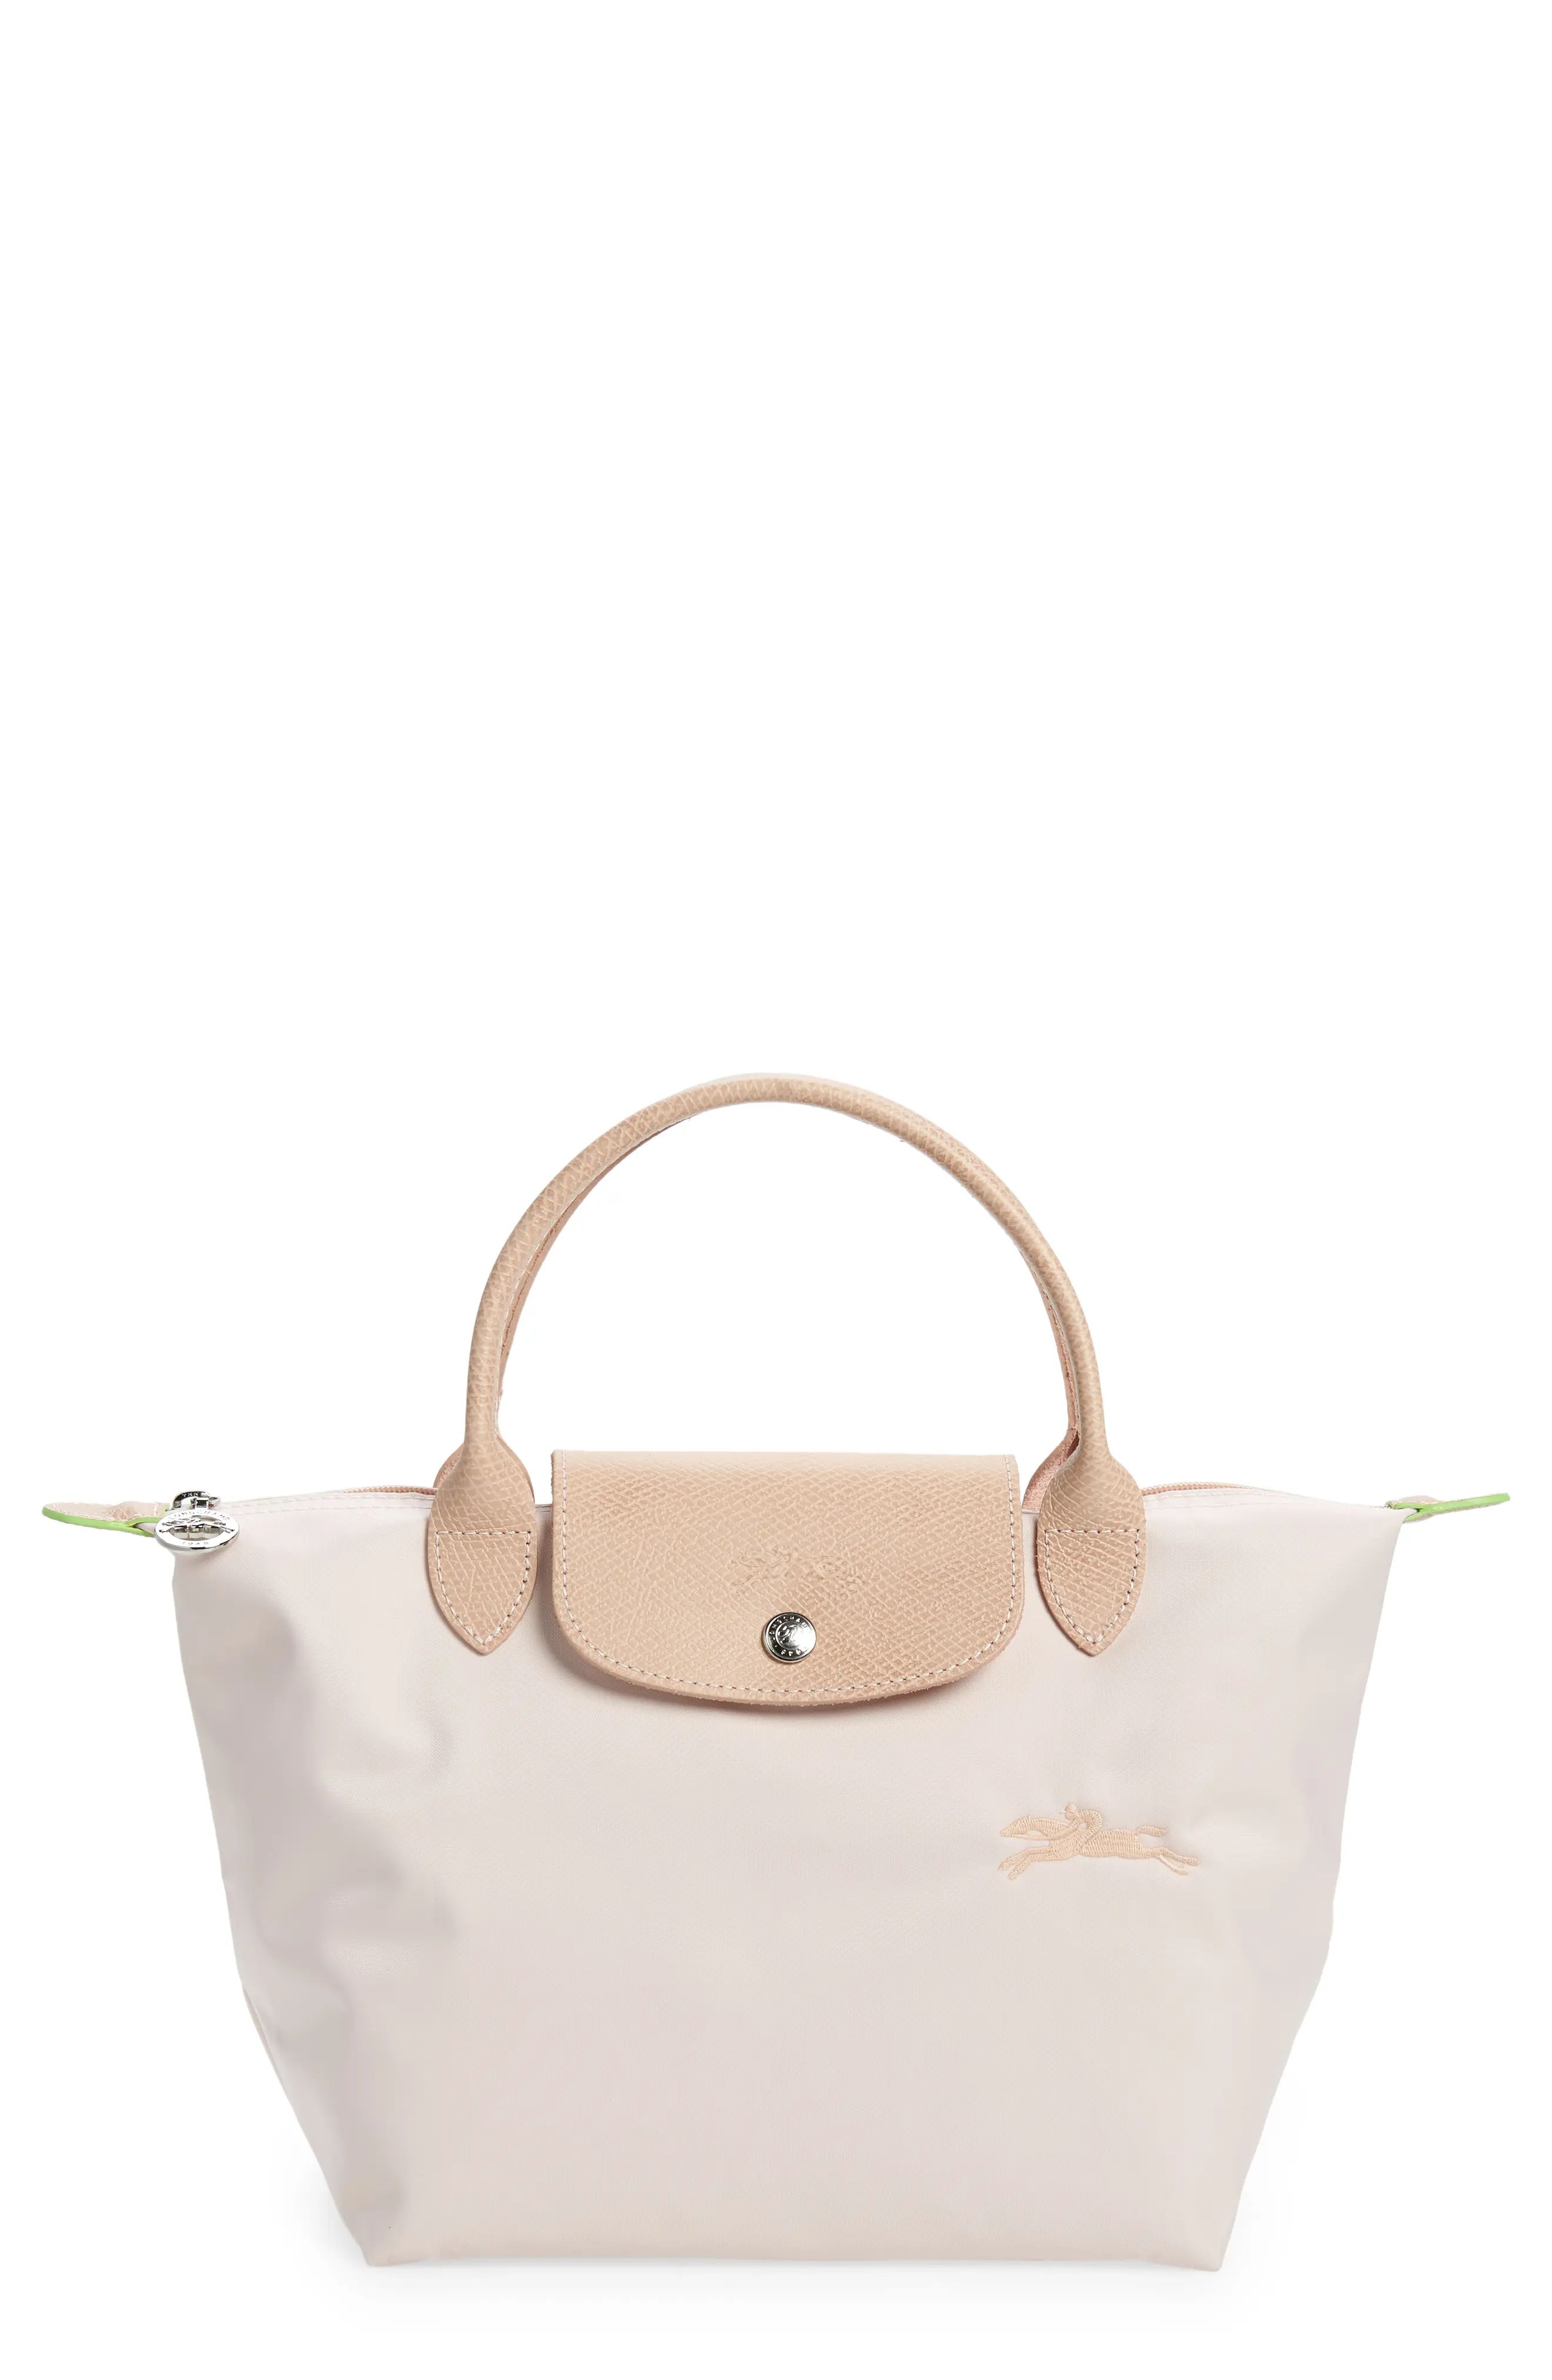 Longchamp Le Pliage Top Handle Bag in Flowers at Nordstrom | Nordstrom